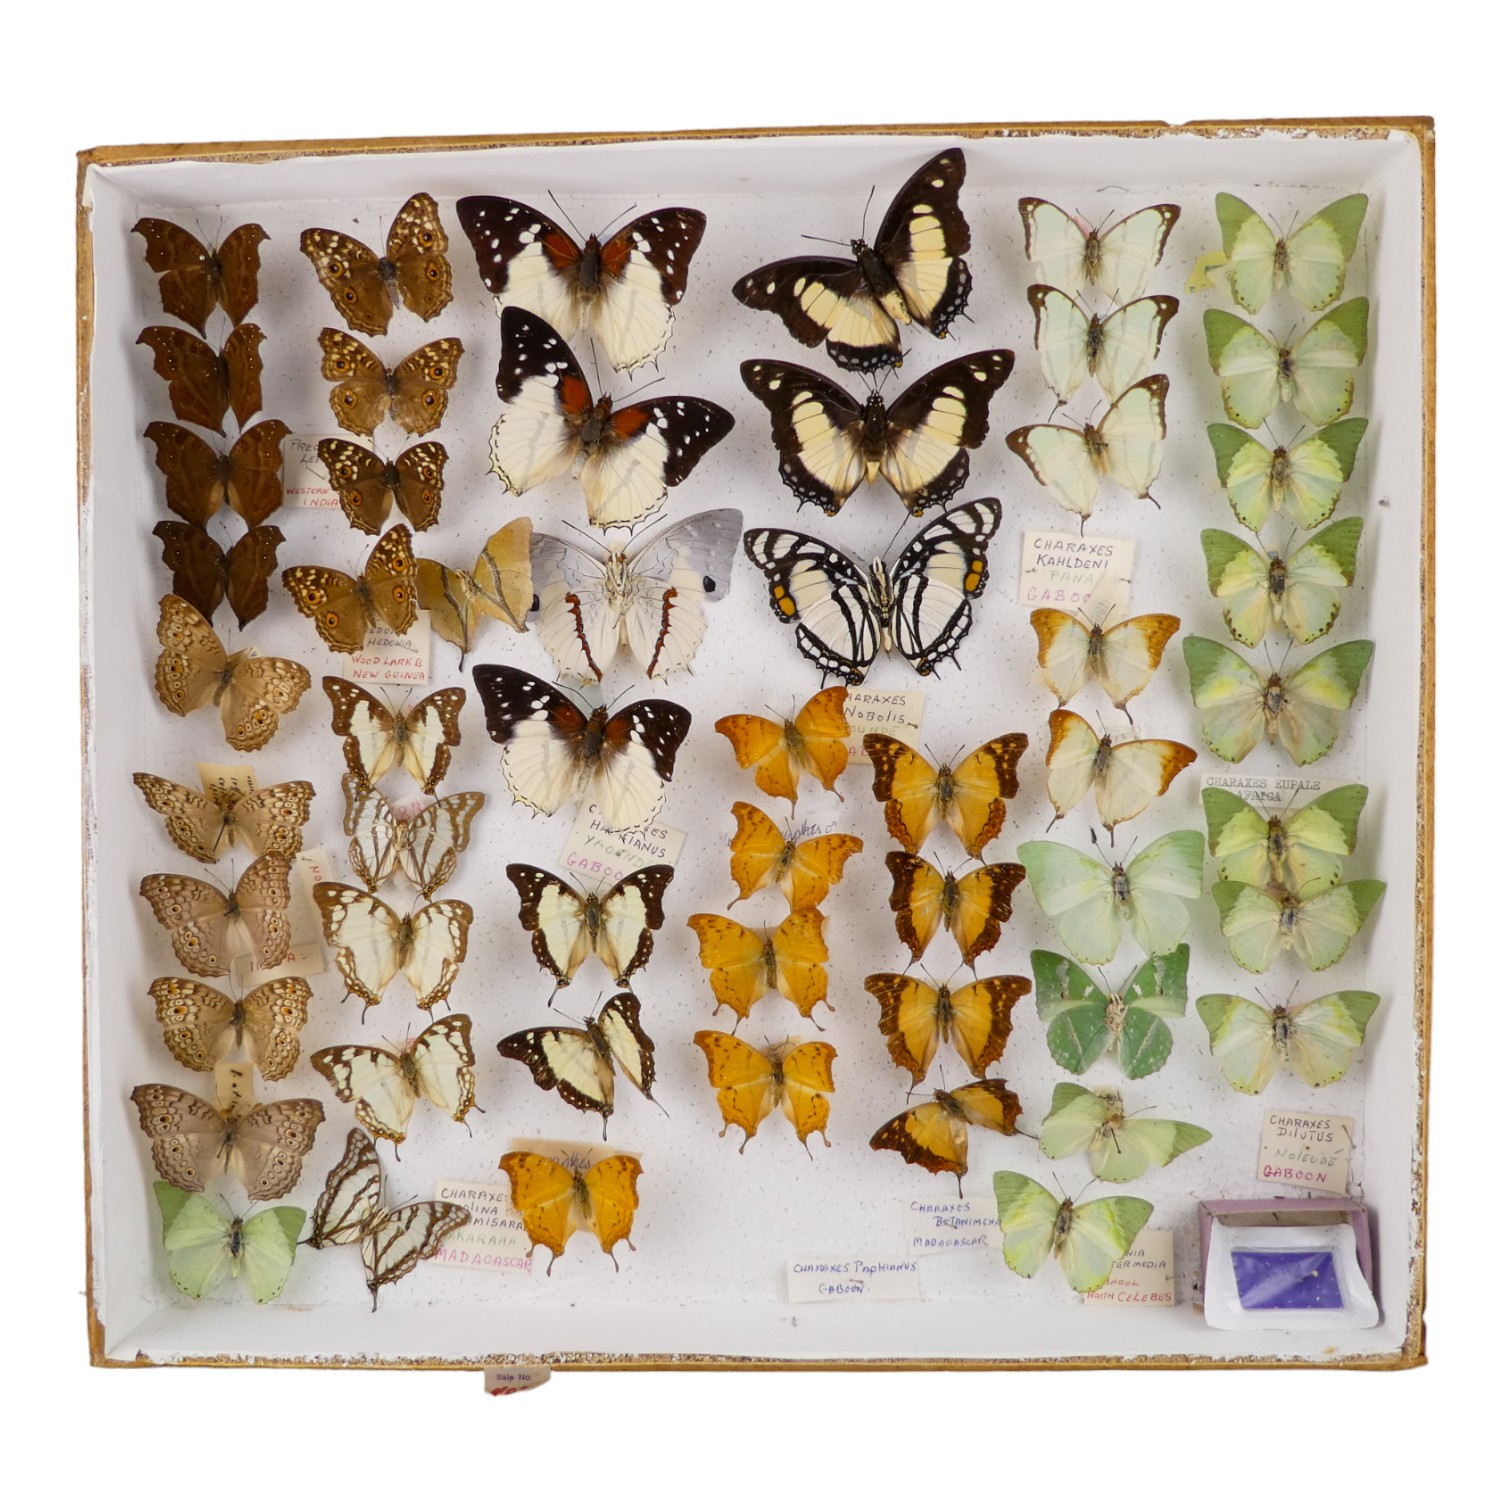 A case of butterflies in six rows - including Common Green Charaxes and Common Map-wing